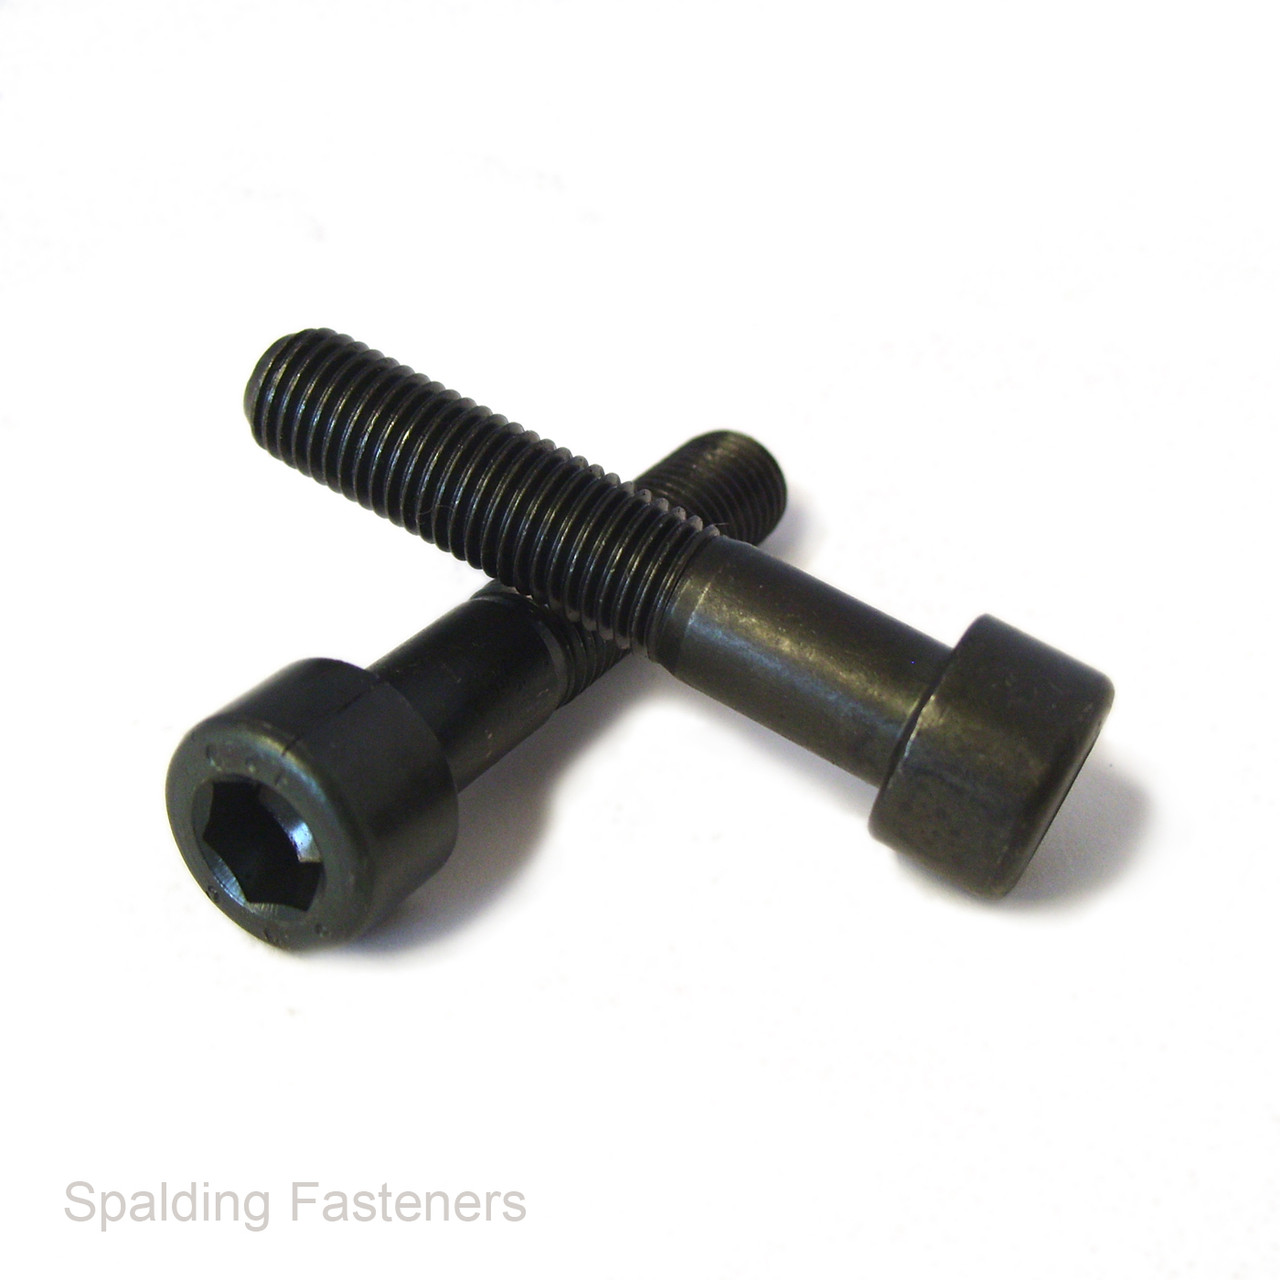 1/4" BSW Whitworth 12.9 High Tensile Steel Socket Cap Bolts